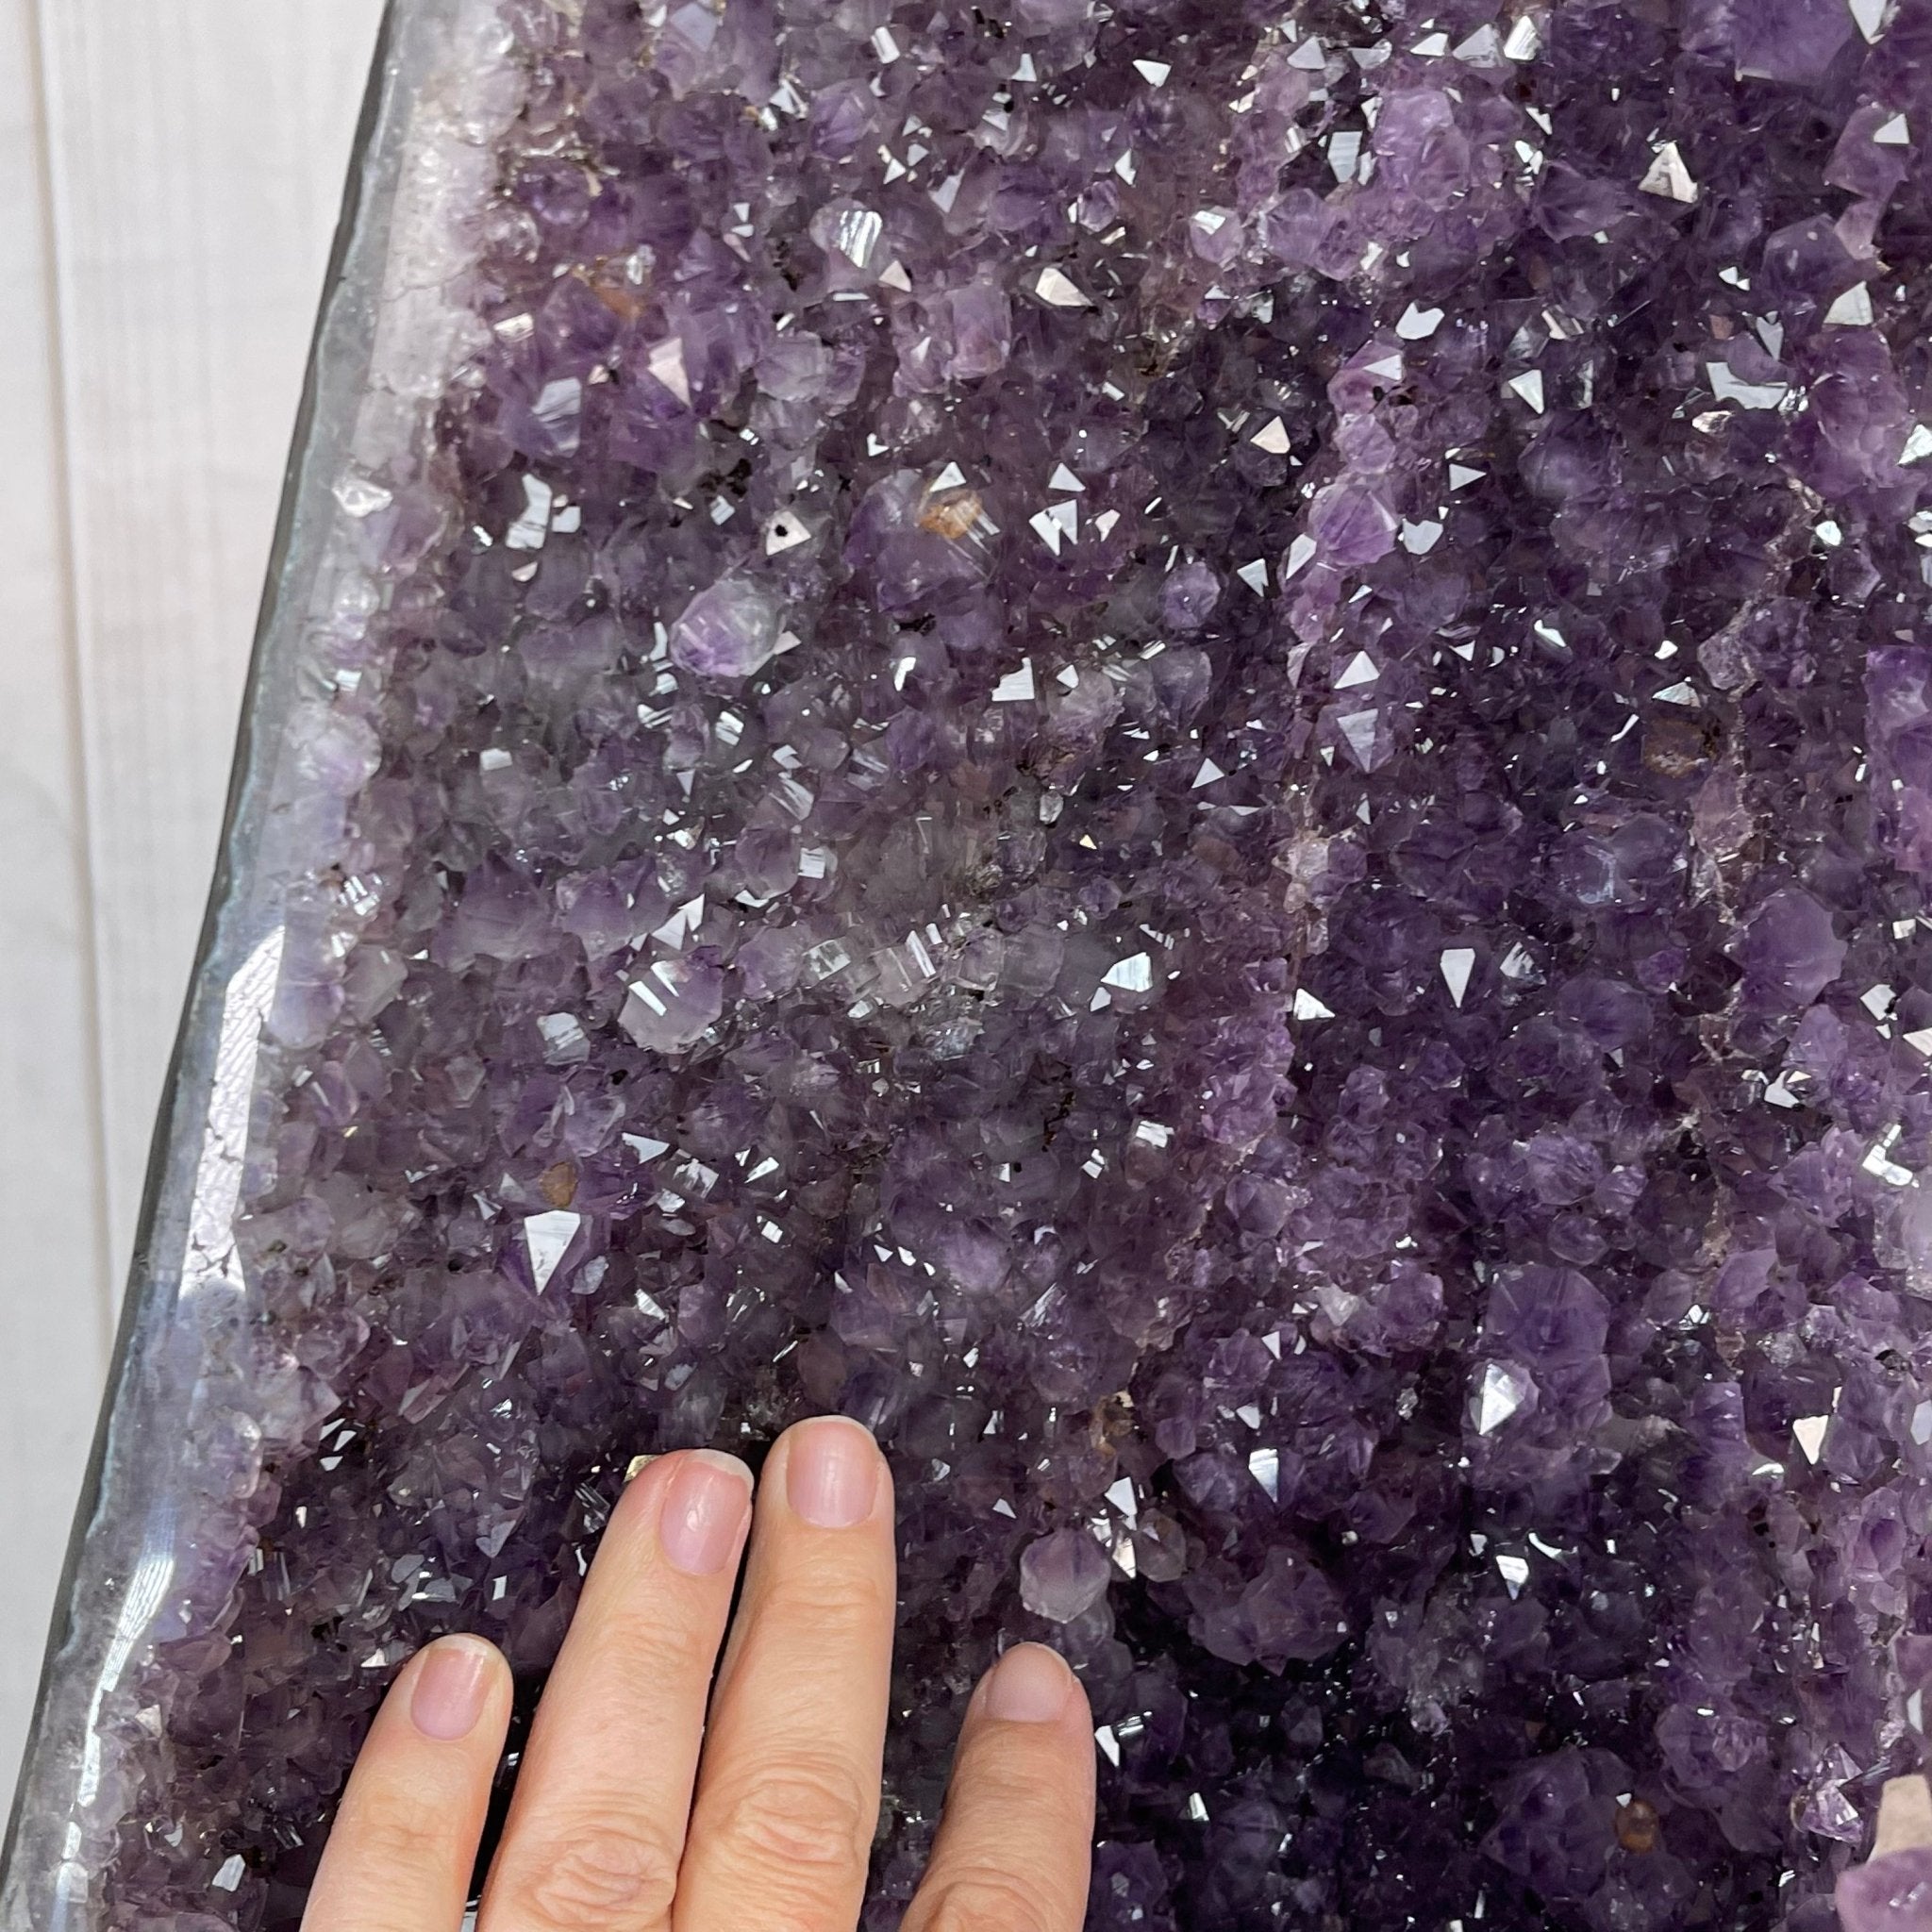 Large Extra Plus Quality Brazilian Amethyst Cathedral, 191.8 lbs & 67.75" Tall #5601-1198 by Brazil Gems - Brazil GemsBrazil GemsLarge Extra Plus Quality Brazilian Amethyst Cathedral, 191.8 lbs & 67.75" Tall #5601-1198 by Brazil GemsCathedrals5601-1198